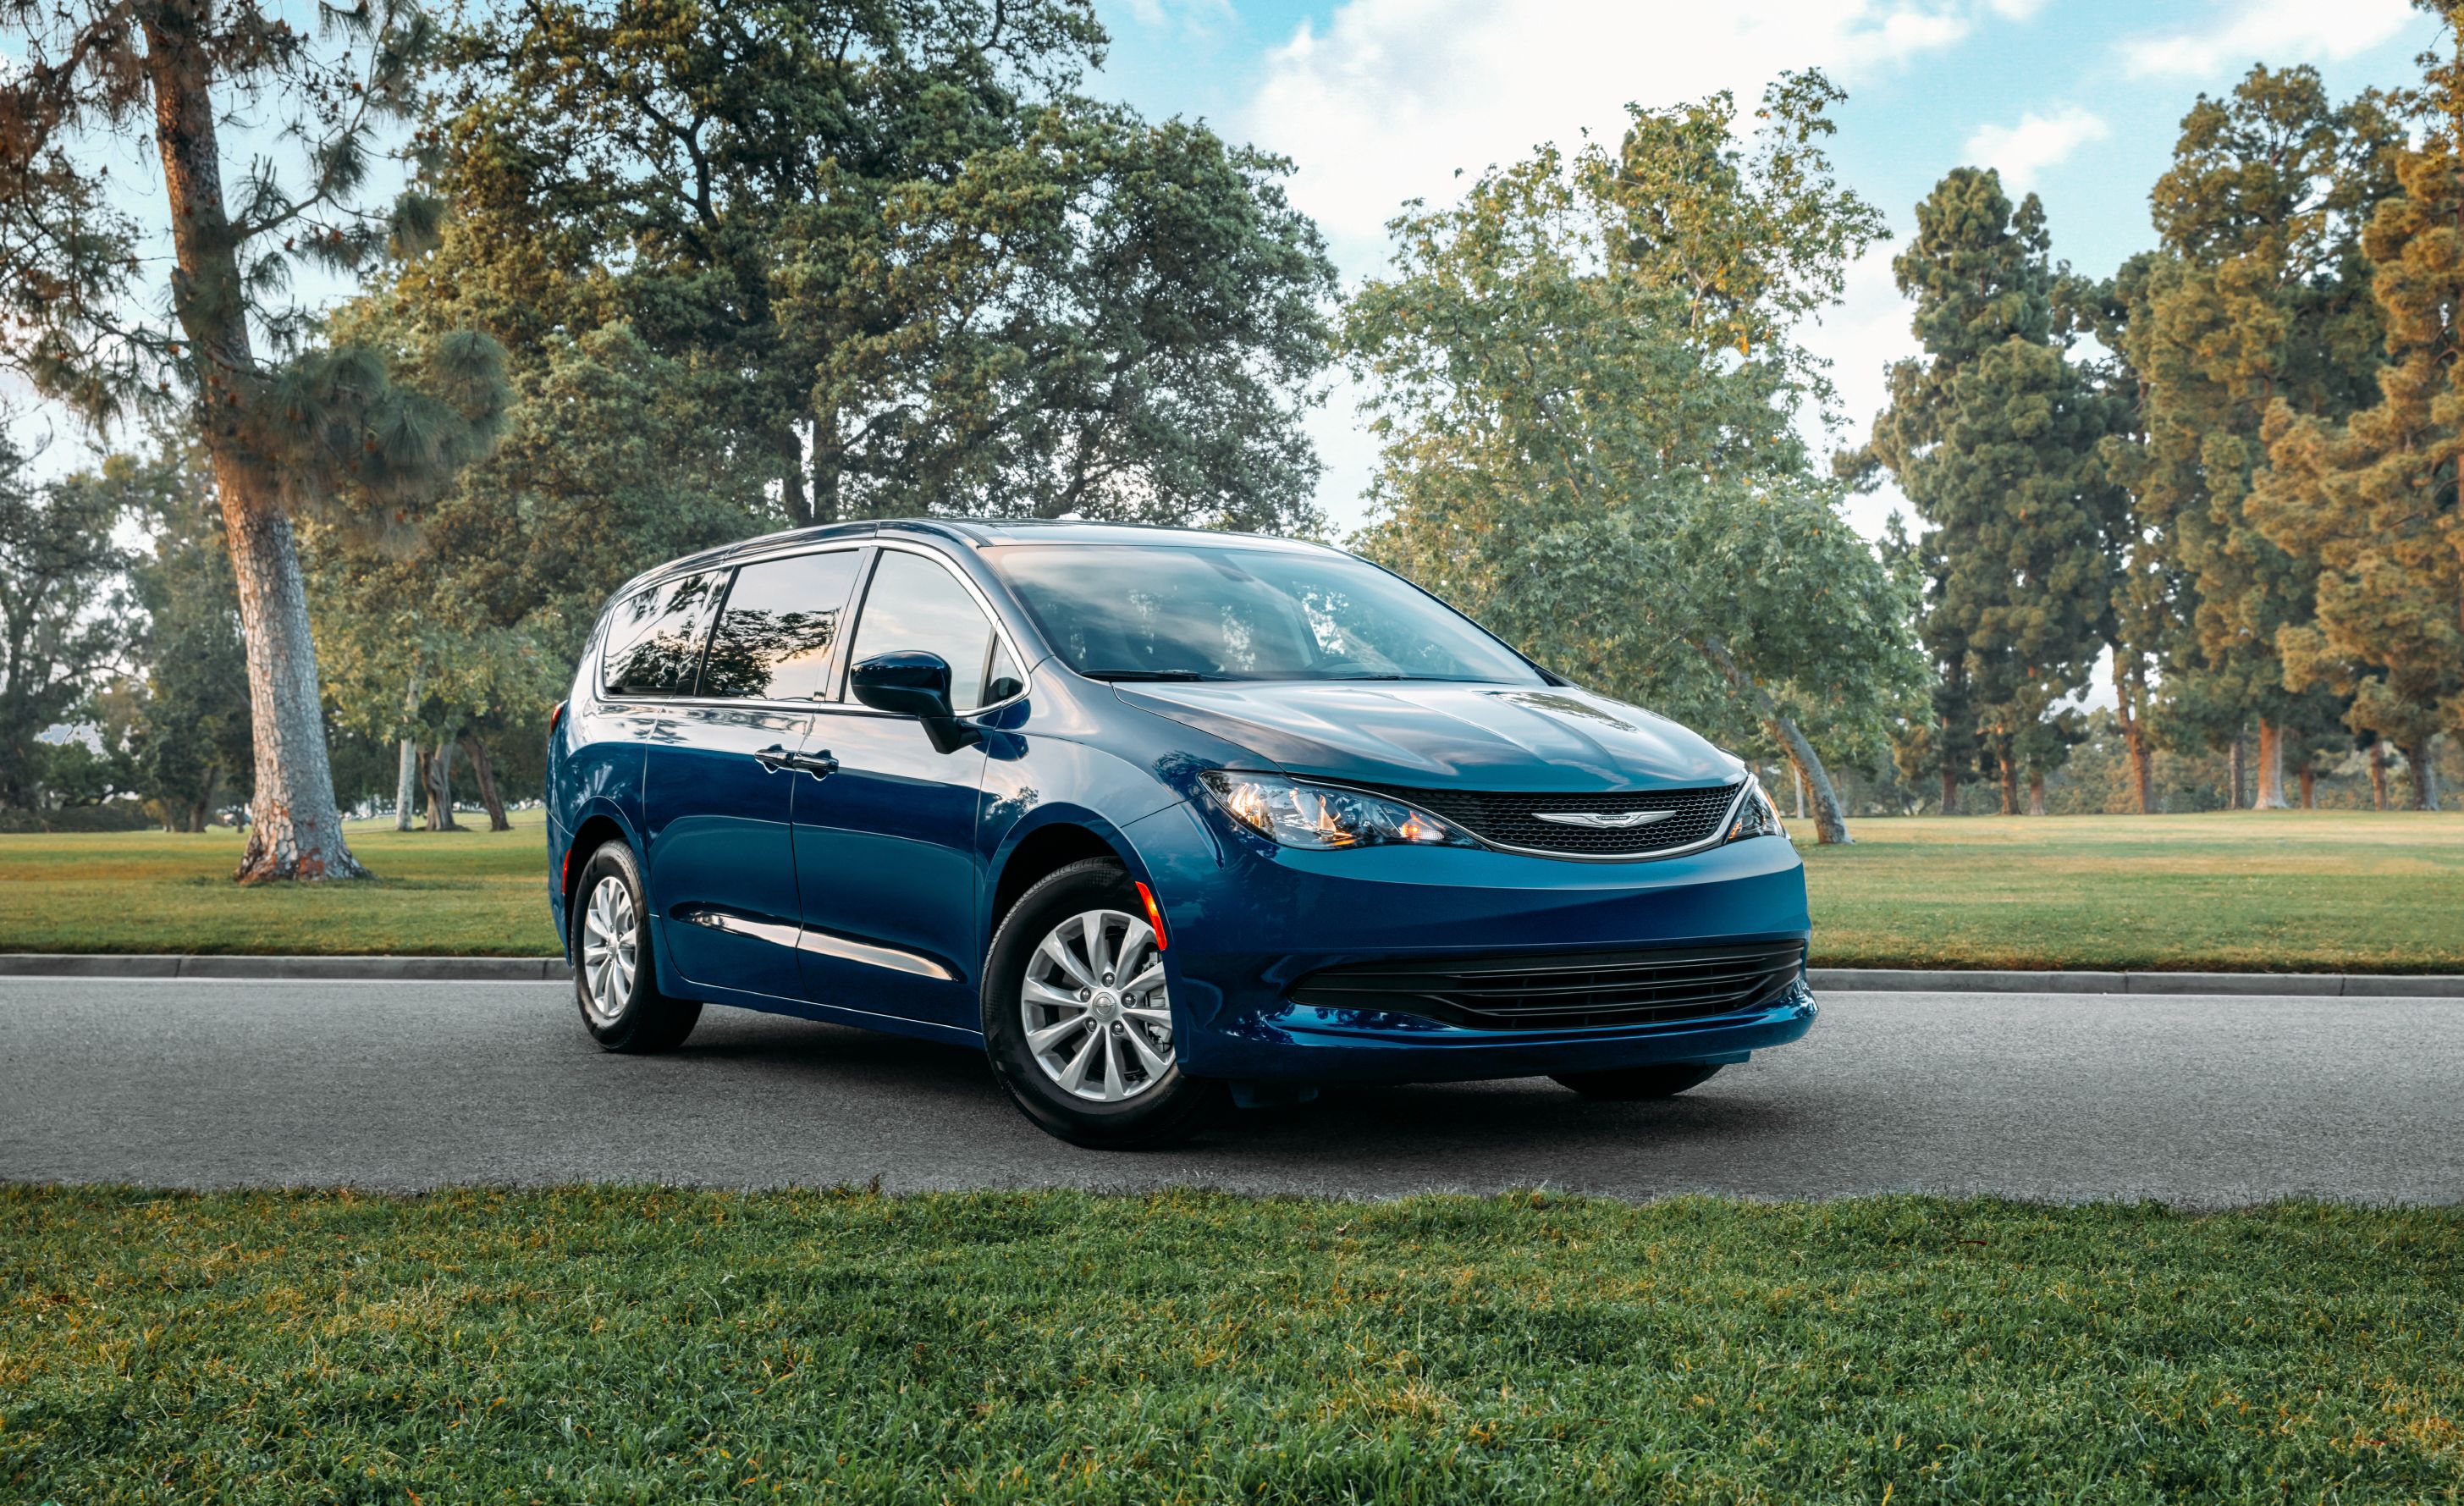 2022 Chrysler Pacifica Specs, Price, MPG & Reviews